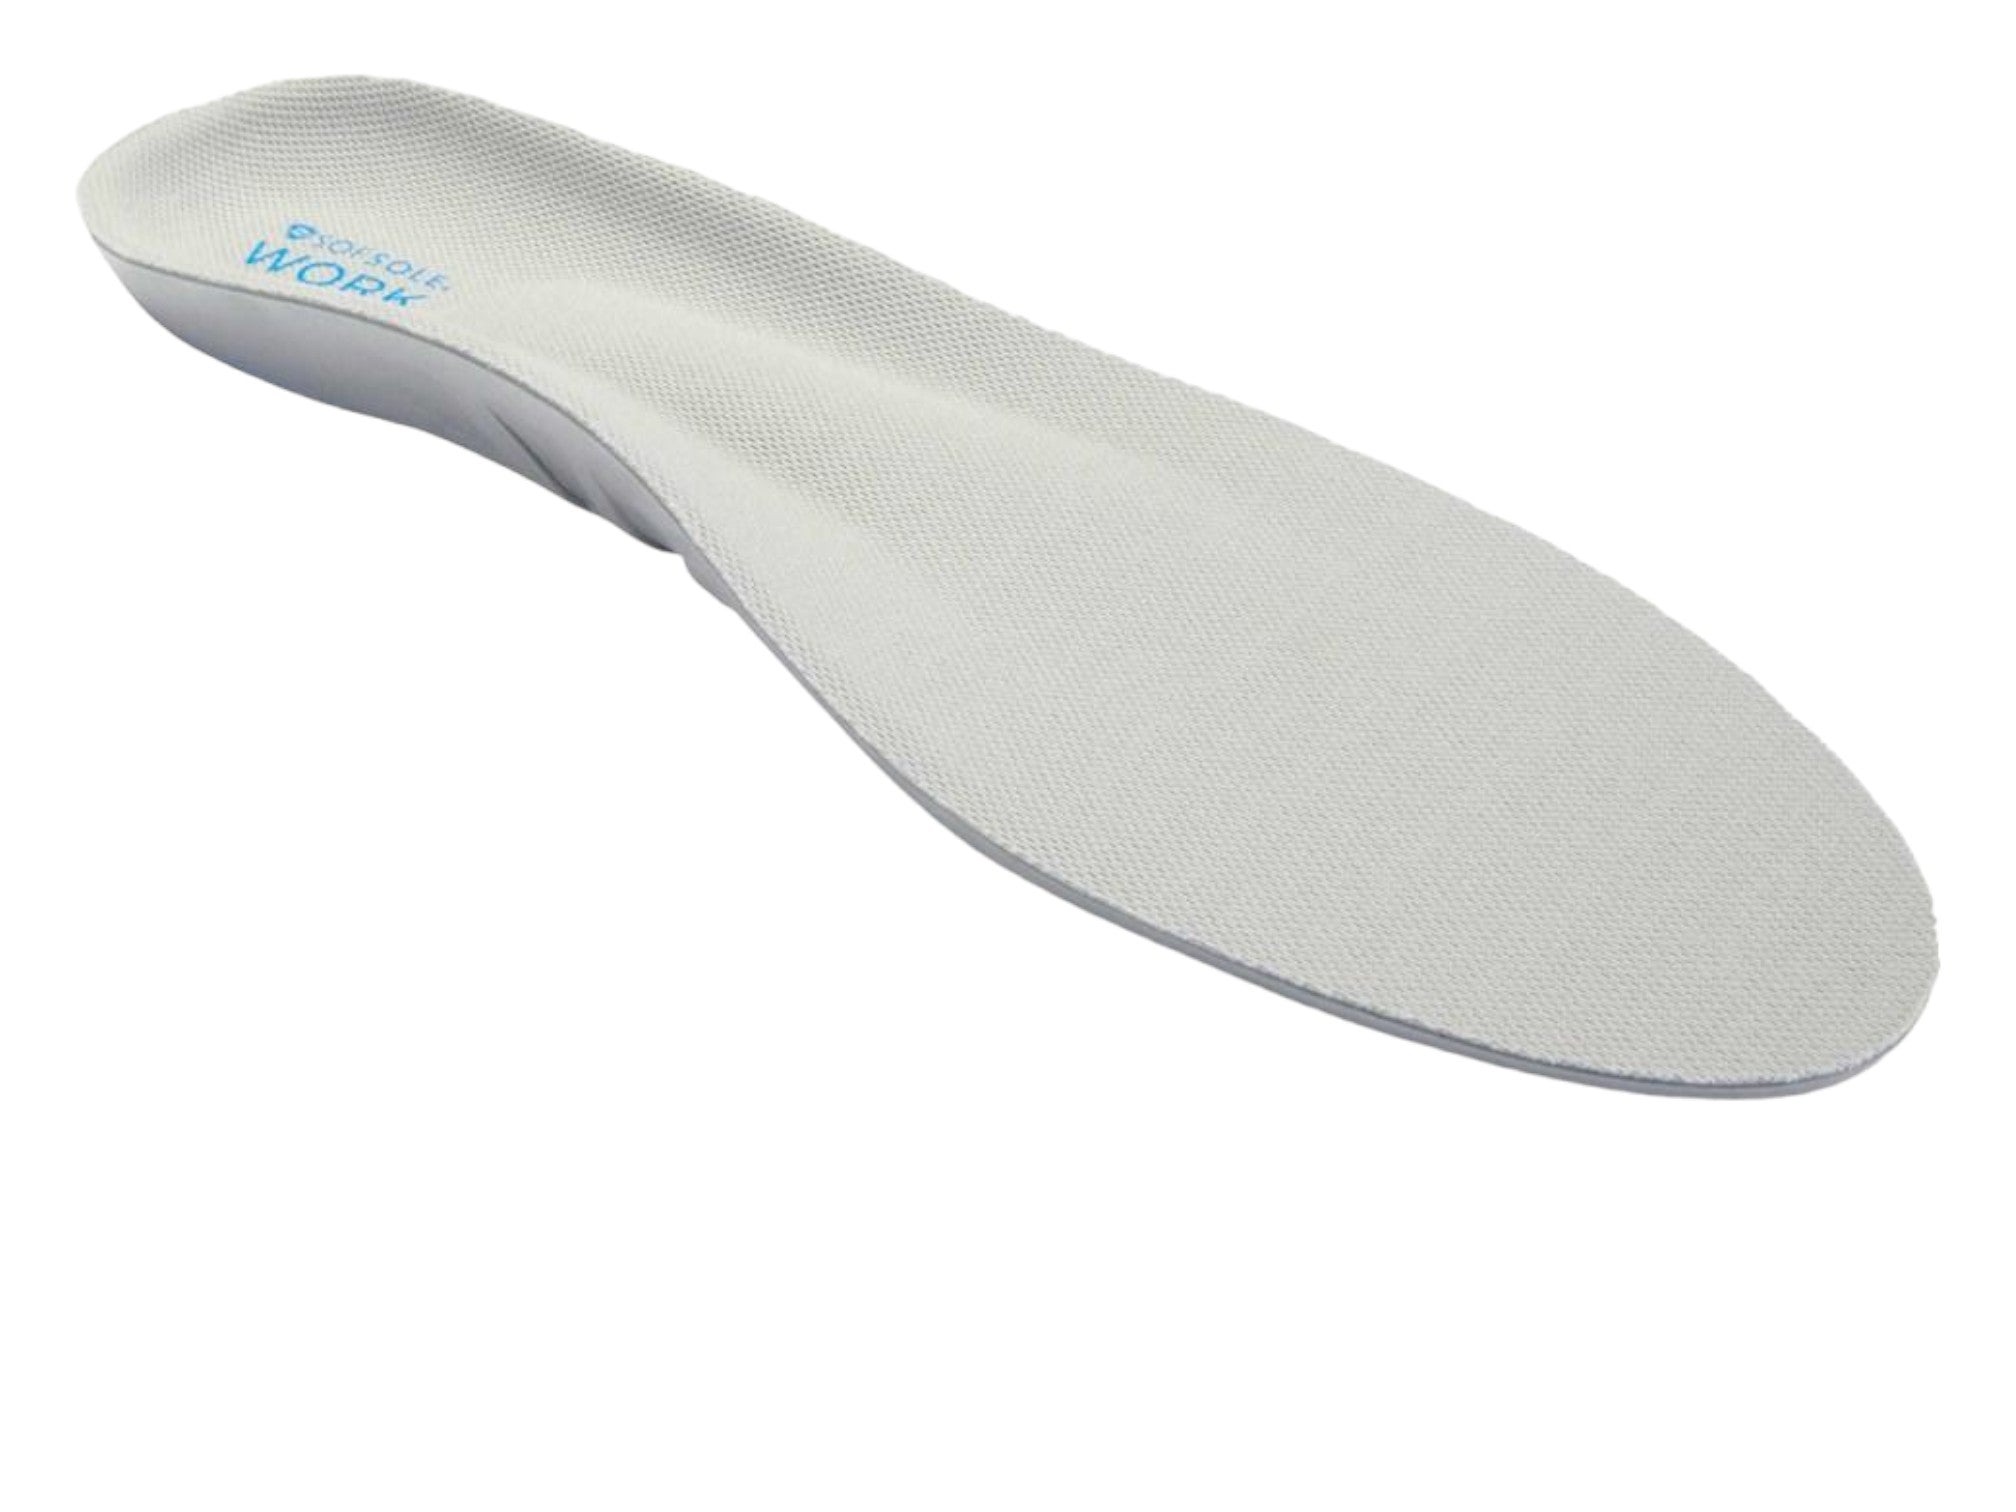 Sof Sole Work Insole - 1 Pair